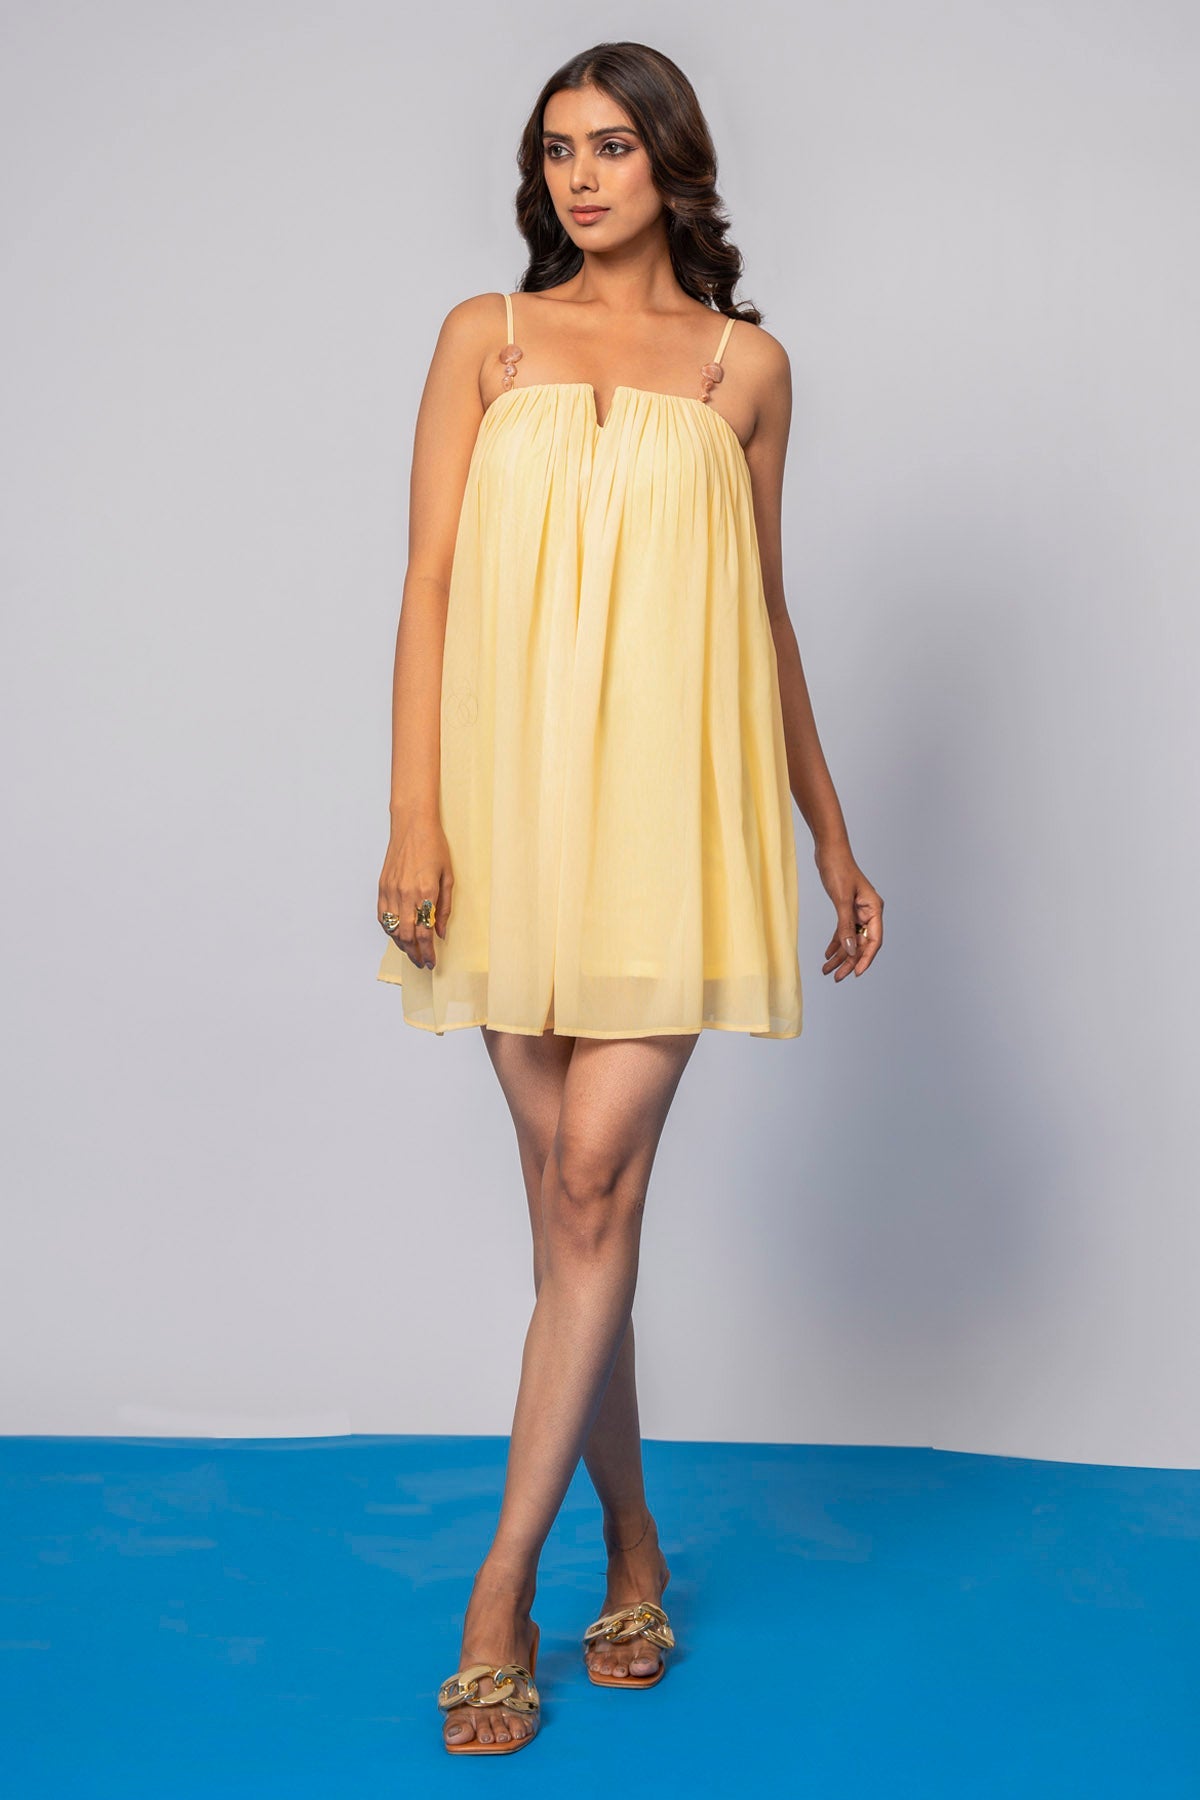 The Decem Ally Yellow Gathered Frilled Dress for Women online available at scrollnshops